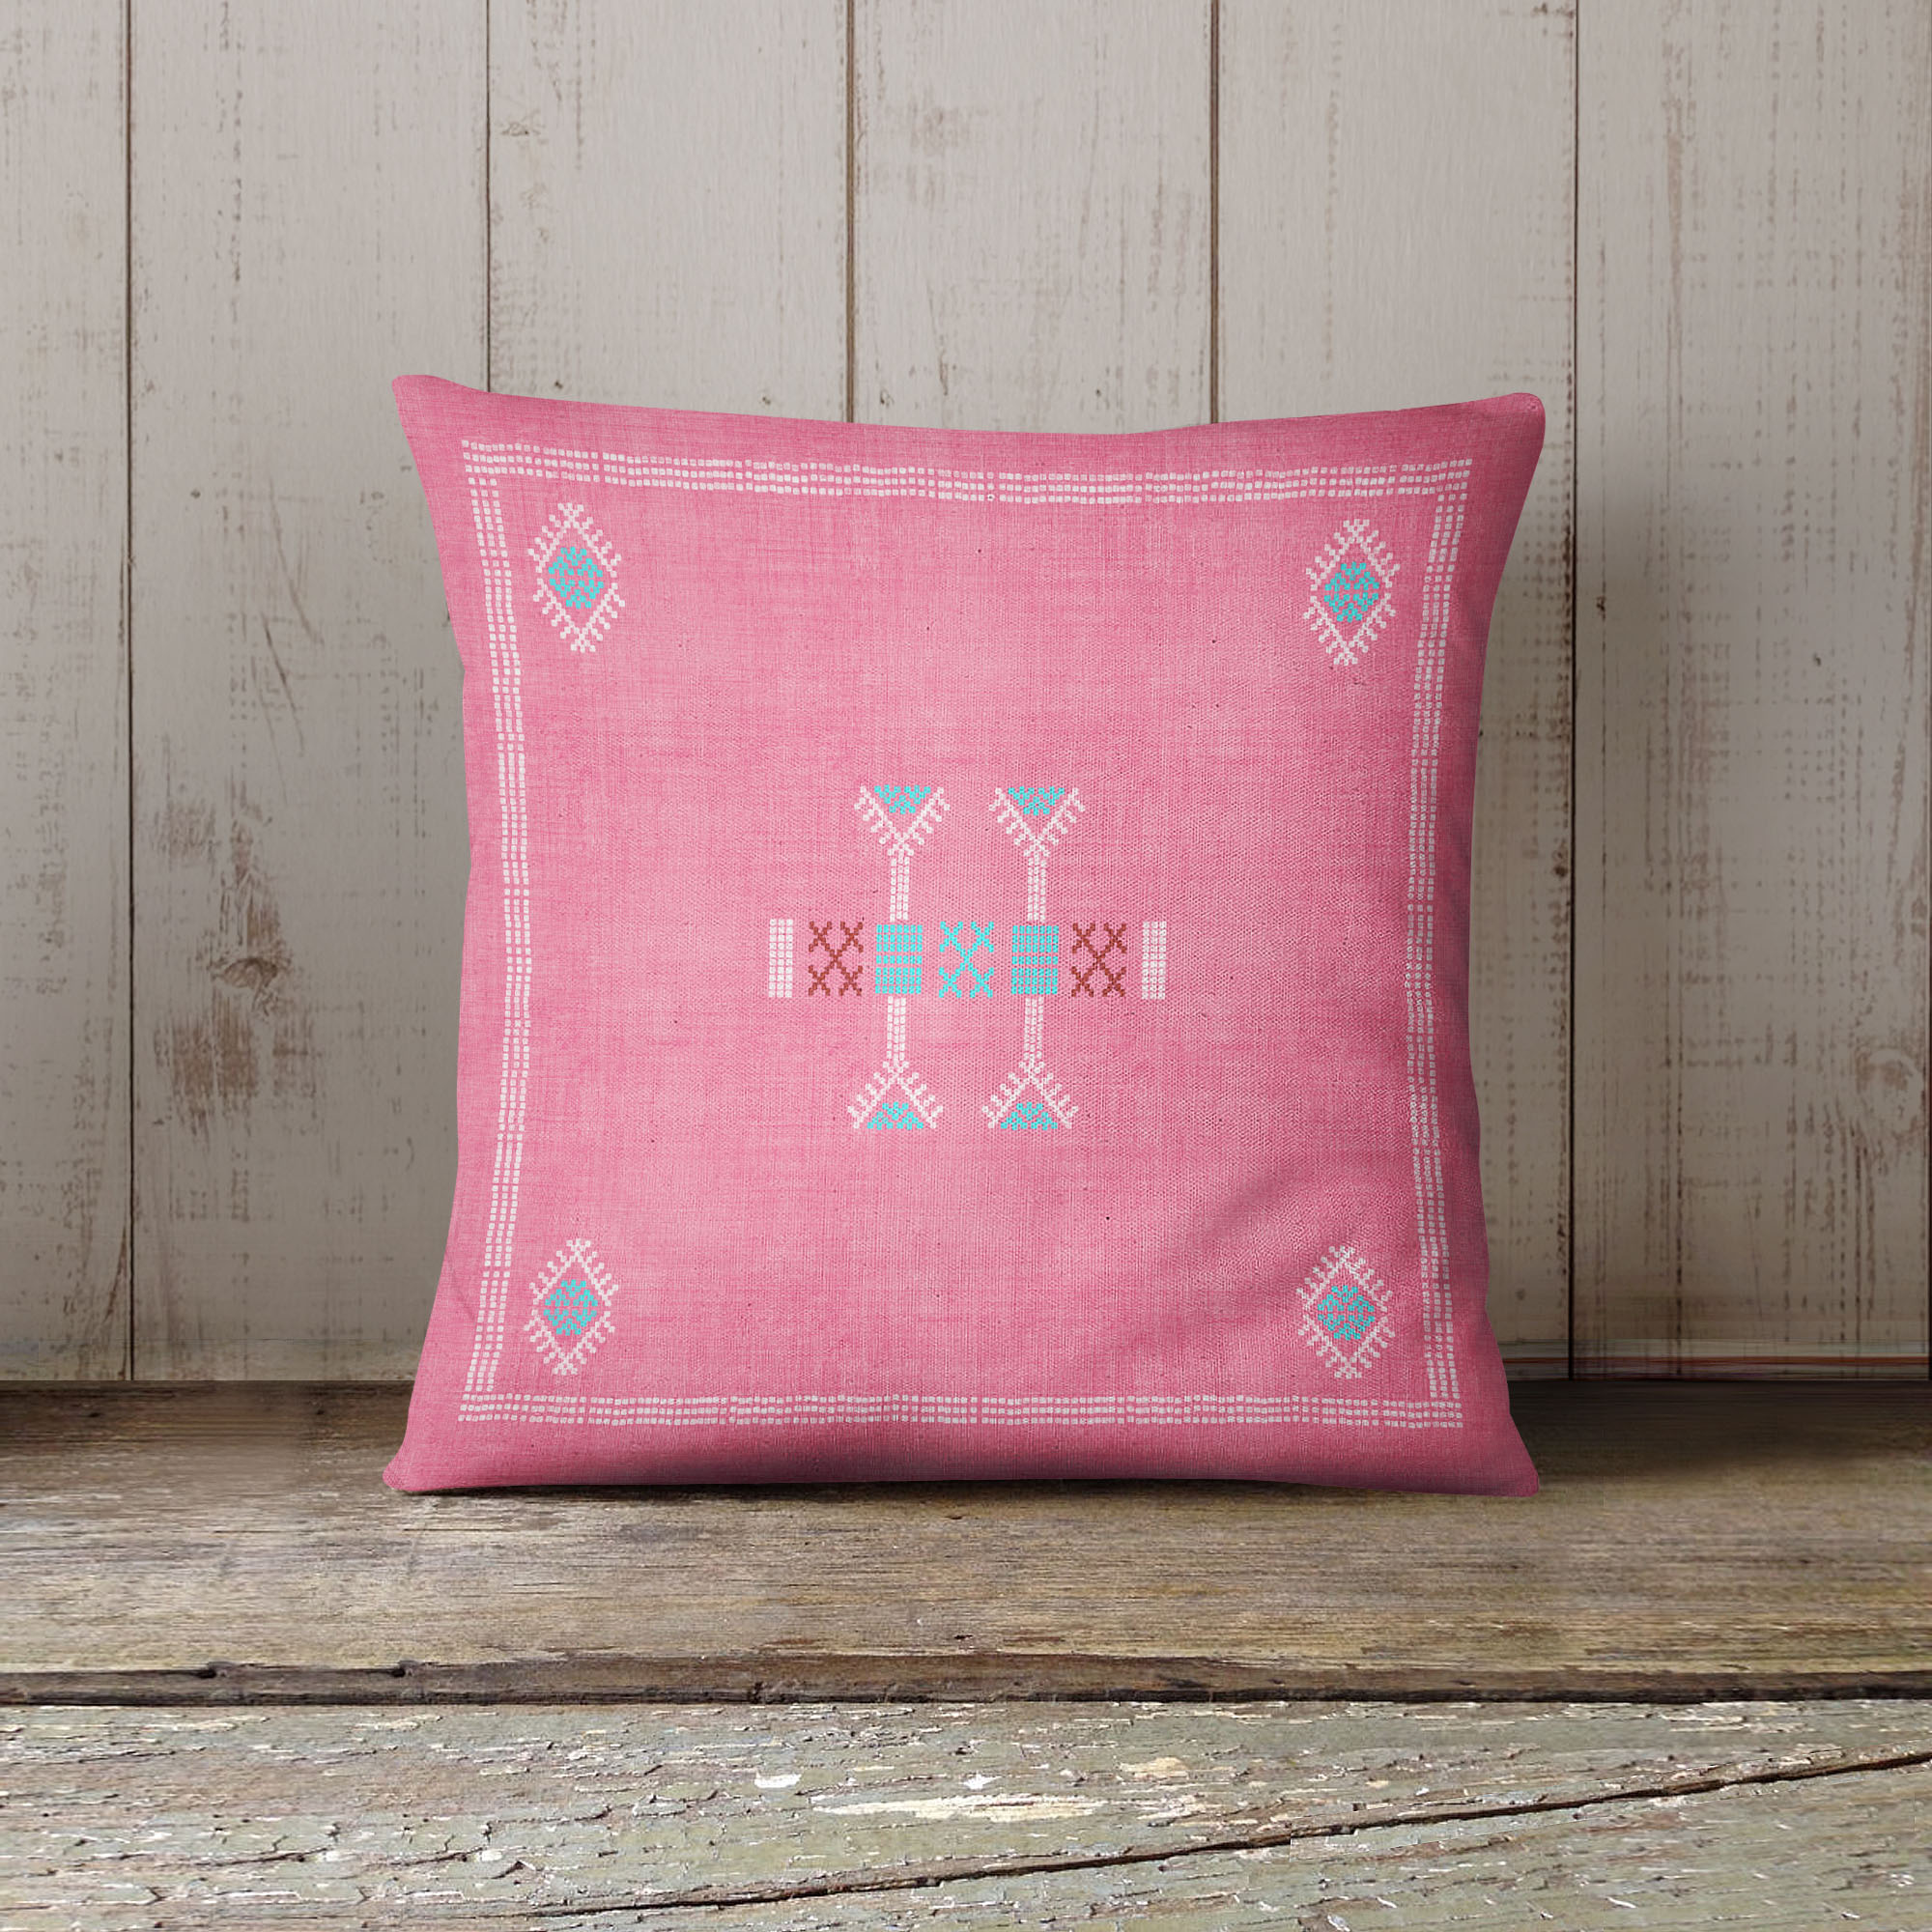 Moroccan Kilim Pink Outdoor Pillow by Kavka Designs - image 2 of 5